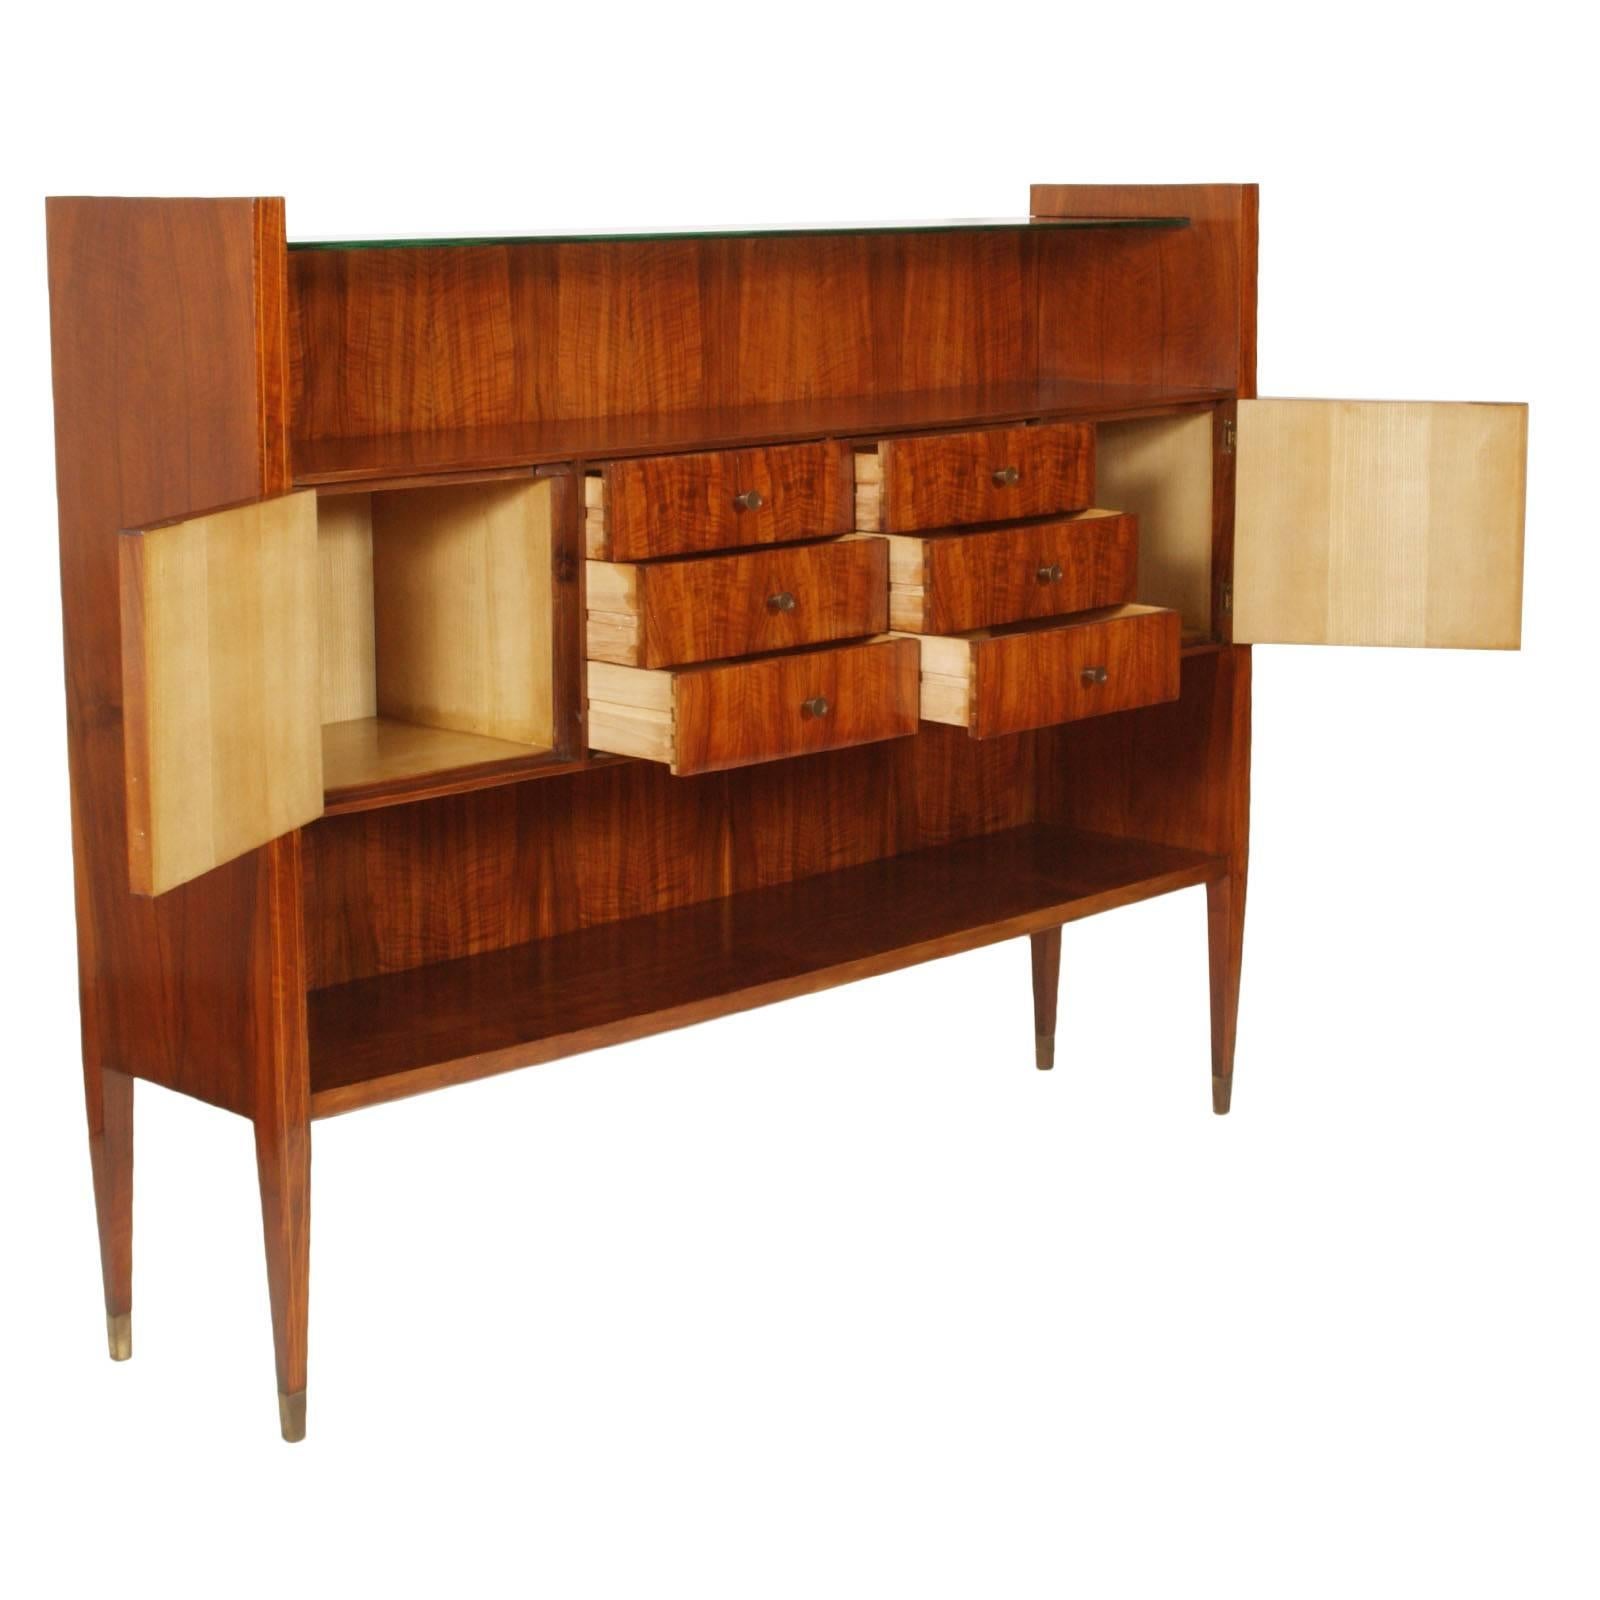 Midcentury Italian Rationalist credenza, external in rosewood with inlaid maple and interior in light wood maple. Crystal top shelf and brushed brass accessories. In excellent conditions.
Very modern and timeless sideboard

Measures cm: H 140 x W